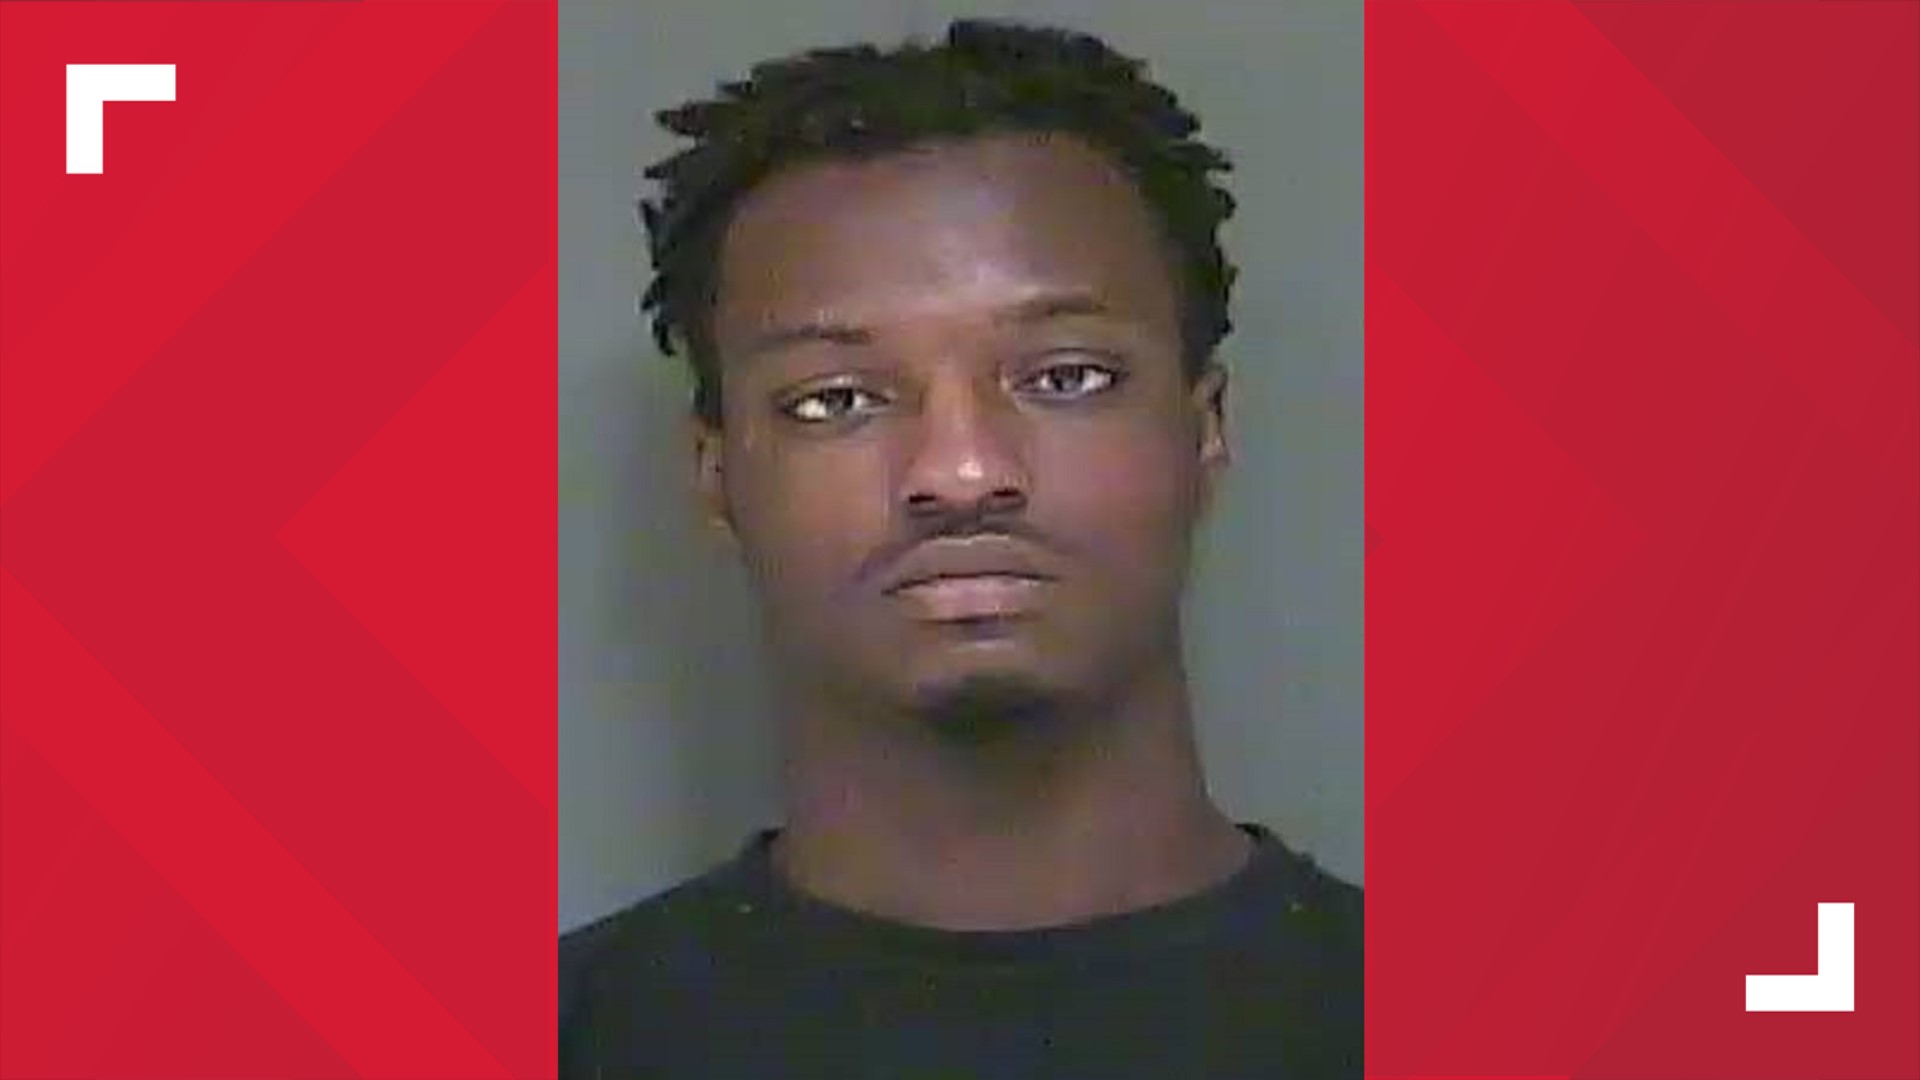 Authorities said Tyrell Deshawn White, 22, was last seen wearing gray sweatpants and a gray sweatshirt and was running south from the area of the jail.